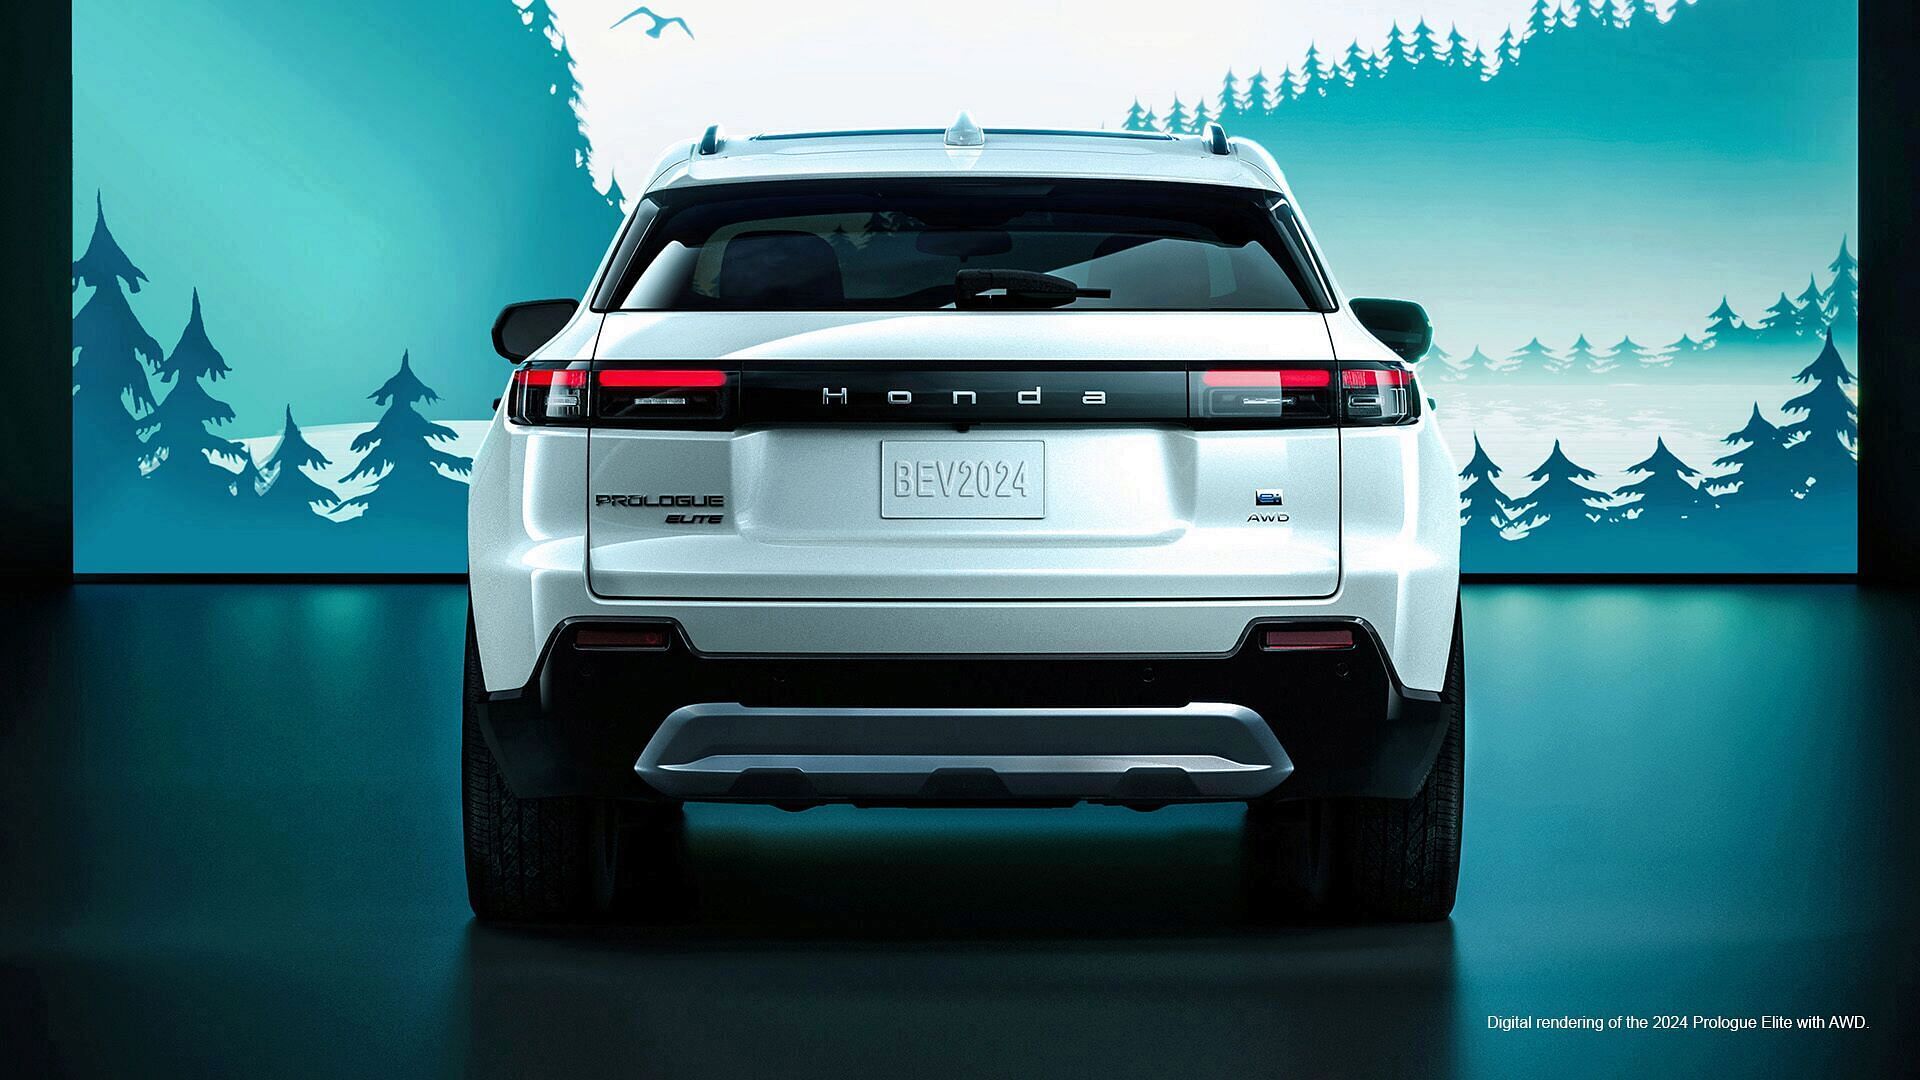 Digital rendering of the 2024 Prologue Elite with AWD